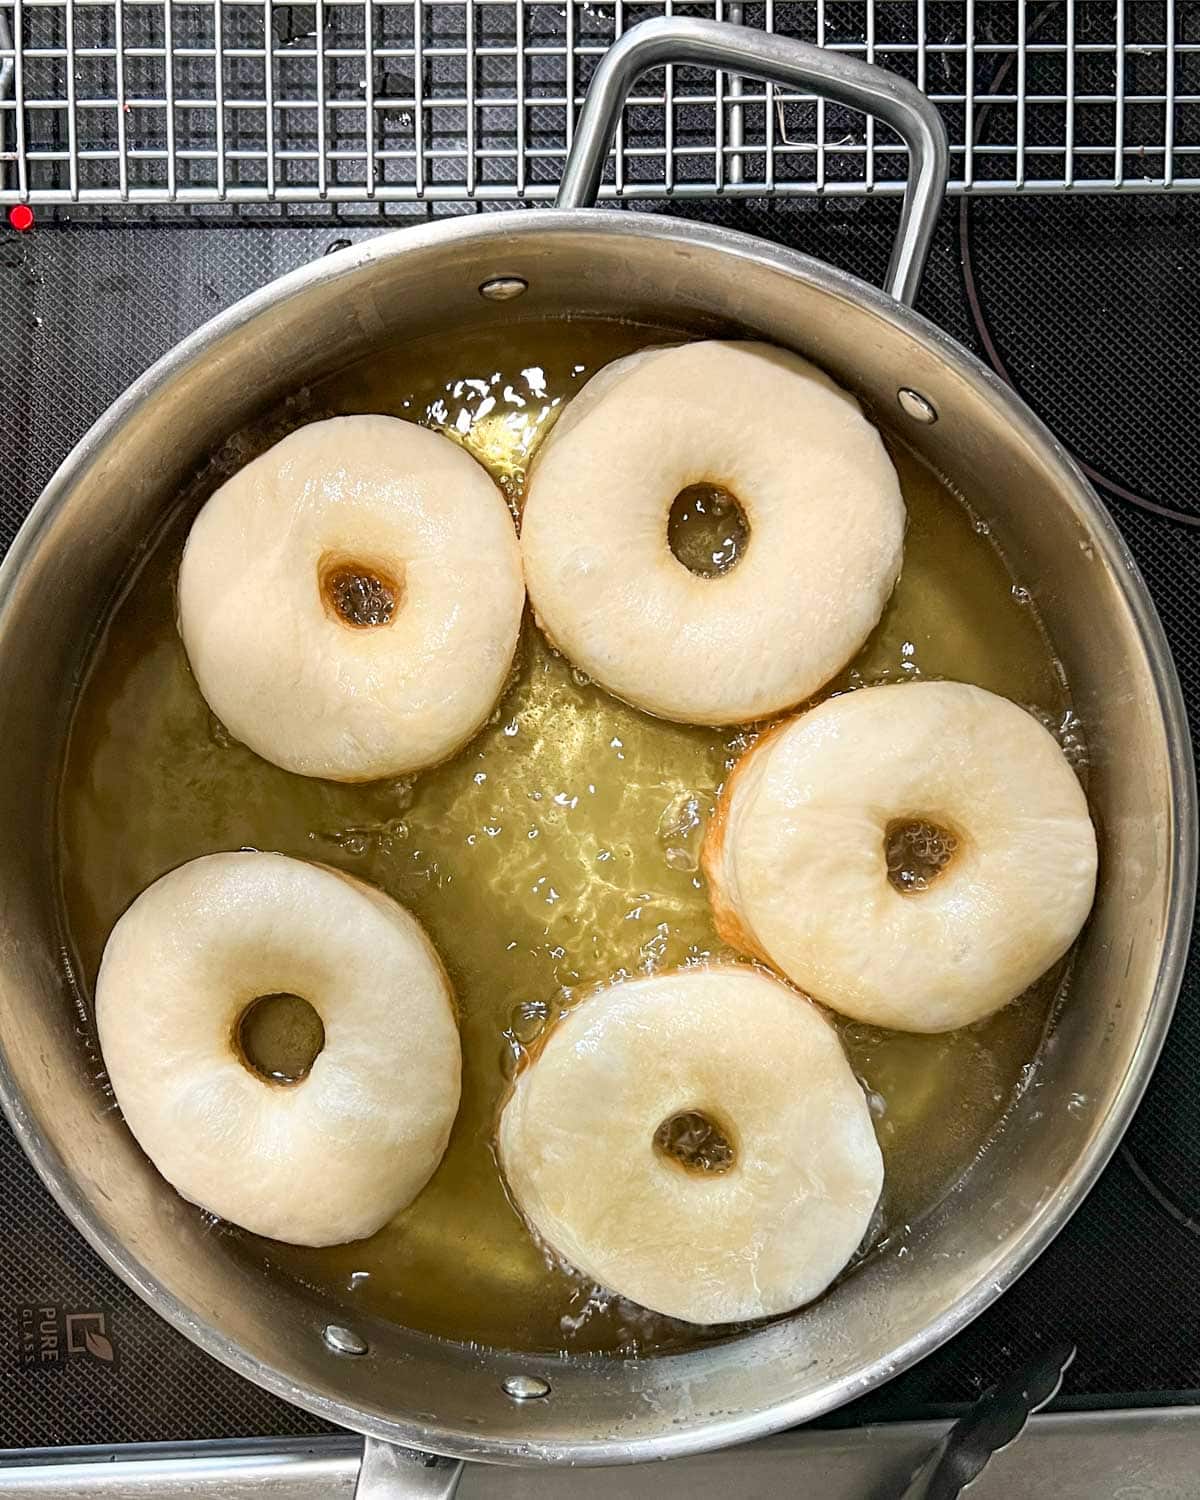 yeast donuts frying in oil in a skillet